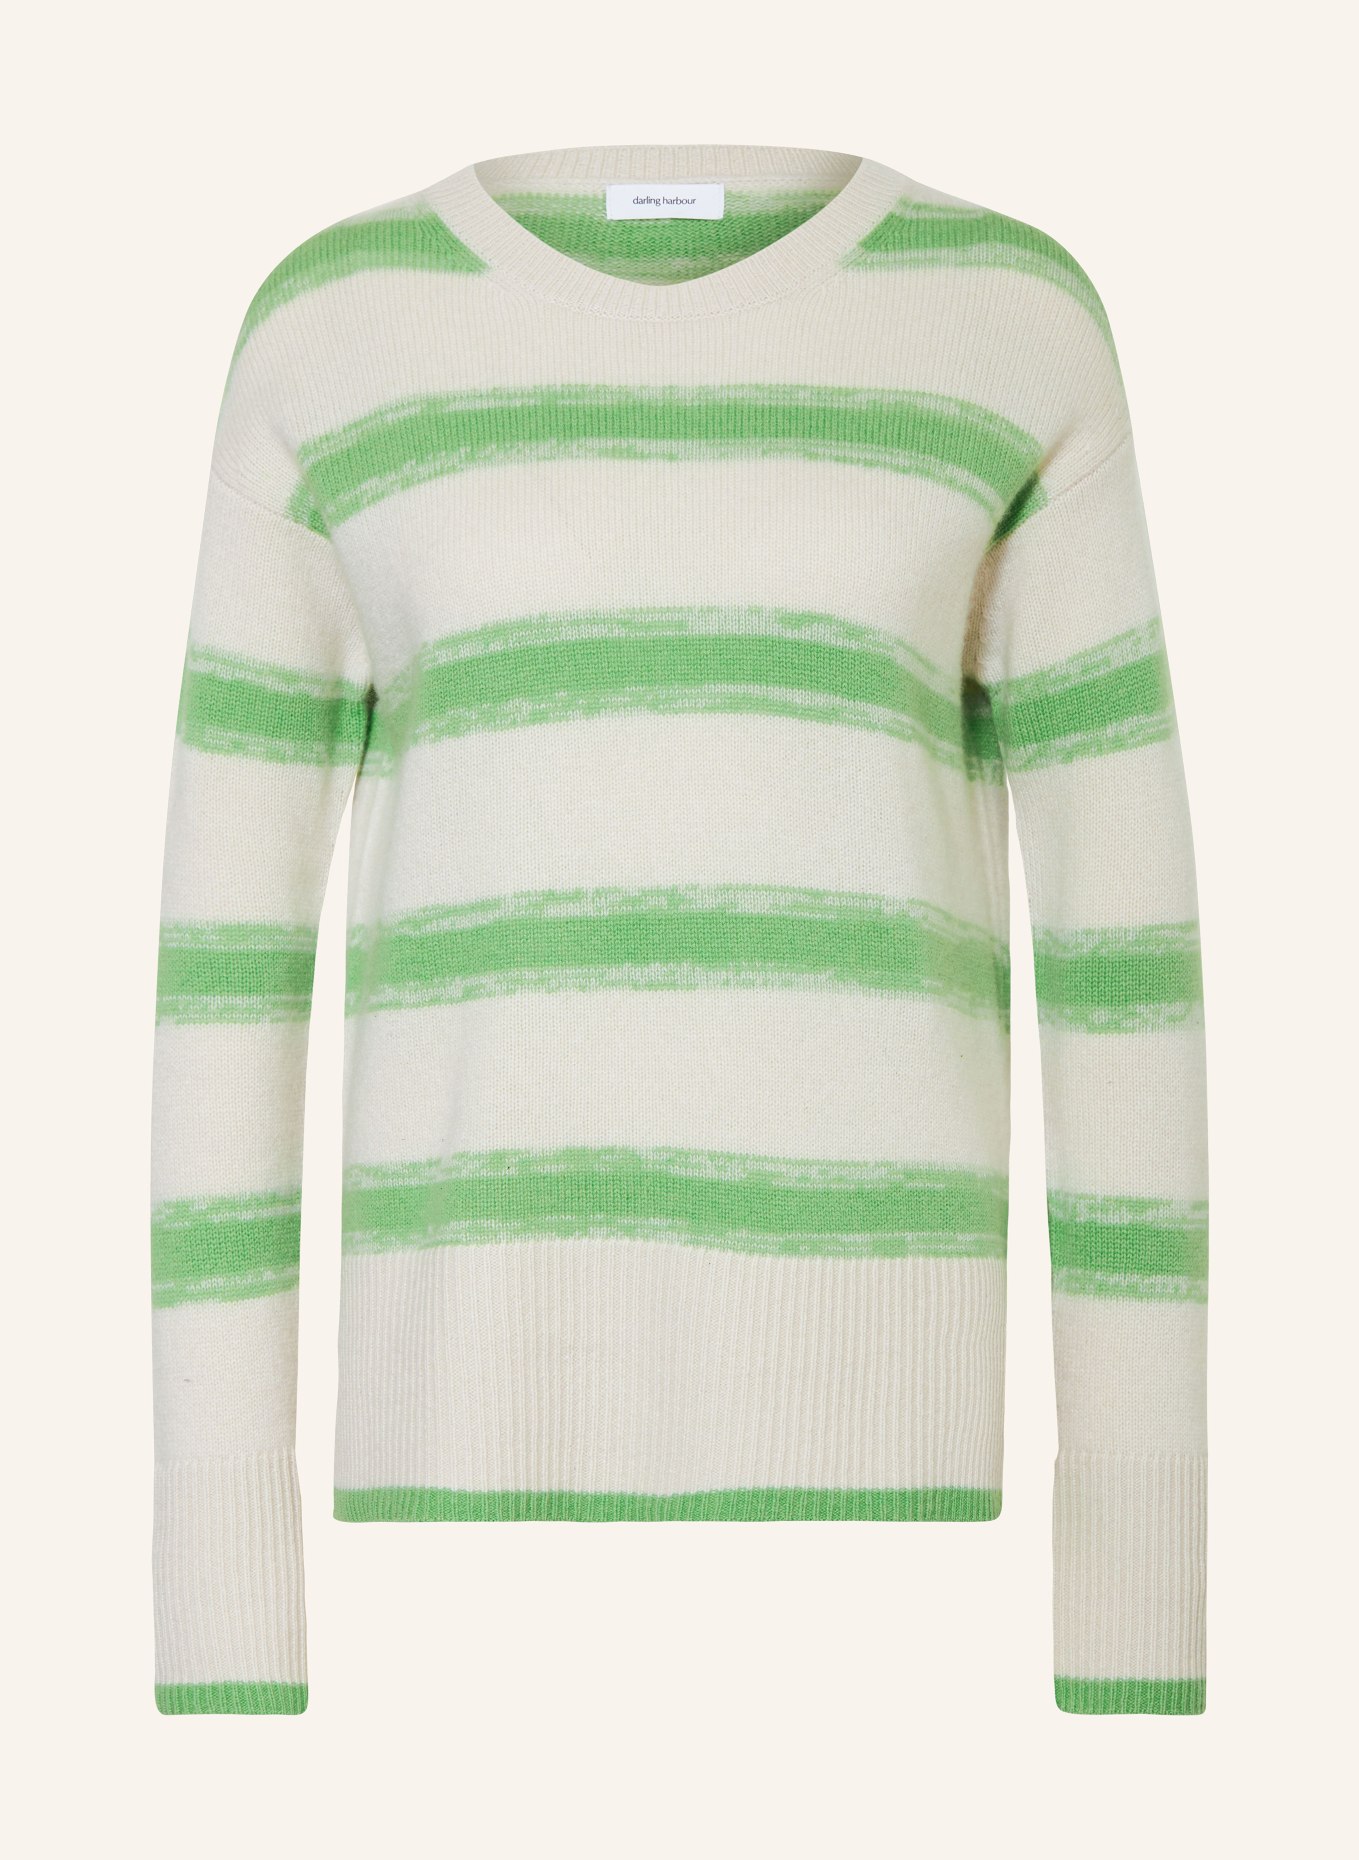 darling harbour Cashmere sweater, Color: LIGHT GRAY/ LIGHT GREEN (Image 1)